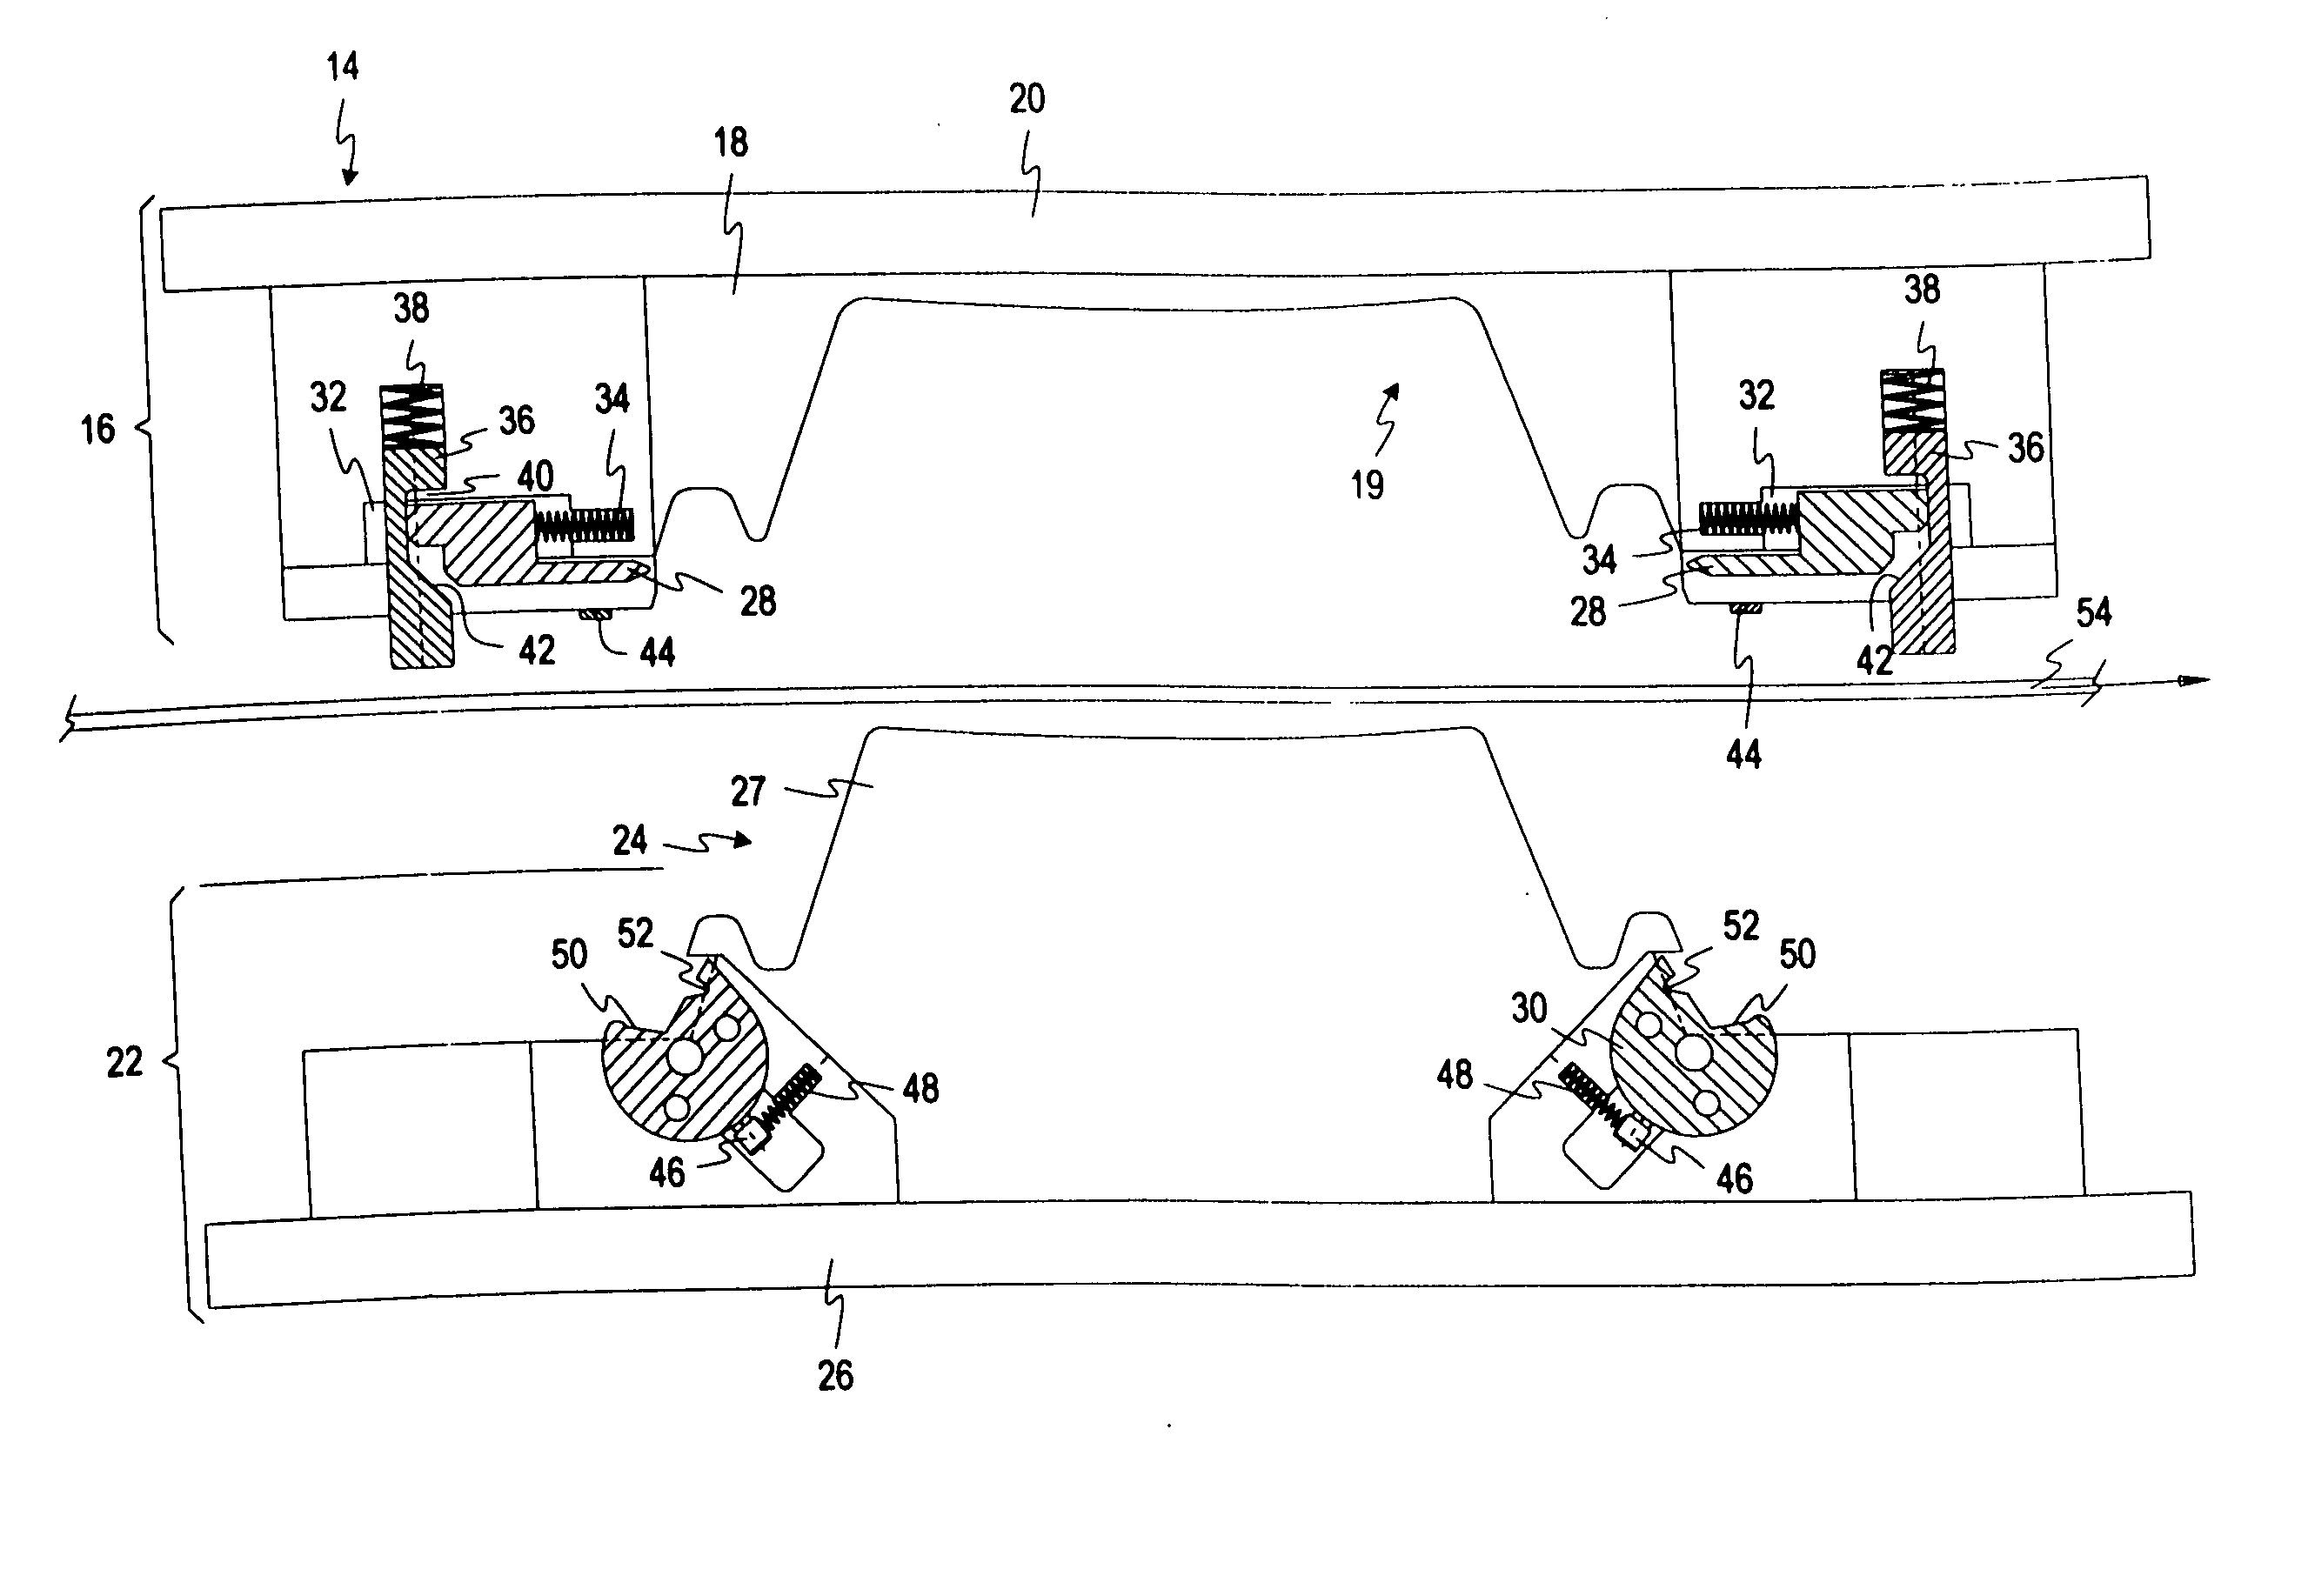 Method of forming a thermoformed foam part